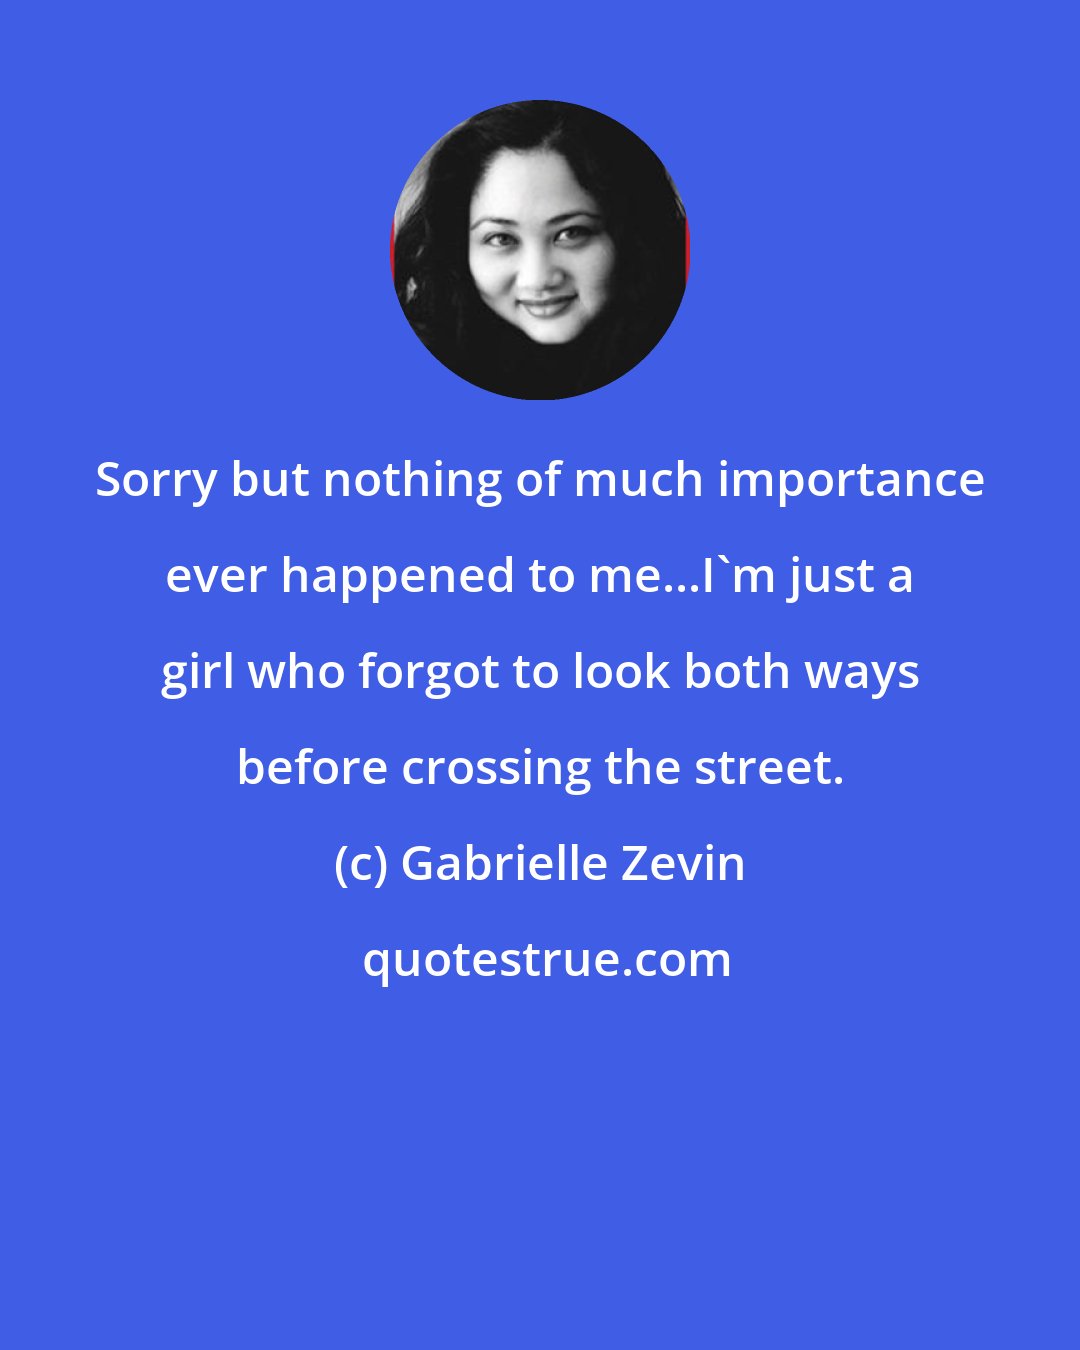 Gabrielle Zevin: Sorry but nothing of much importance ever happened to me...I'm just a girl who forgot to look both ways before crossing the street.